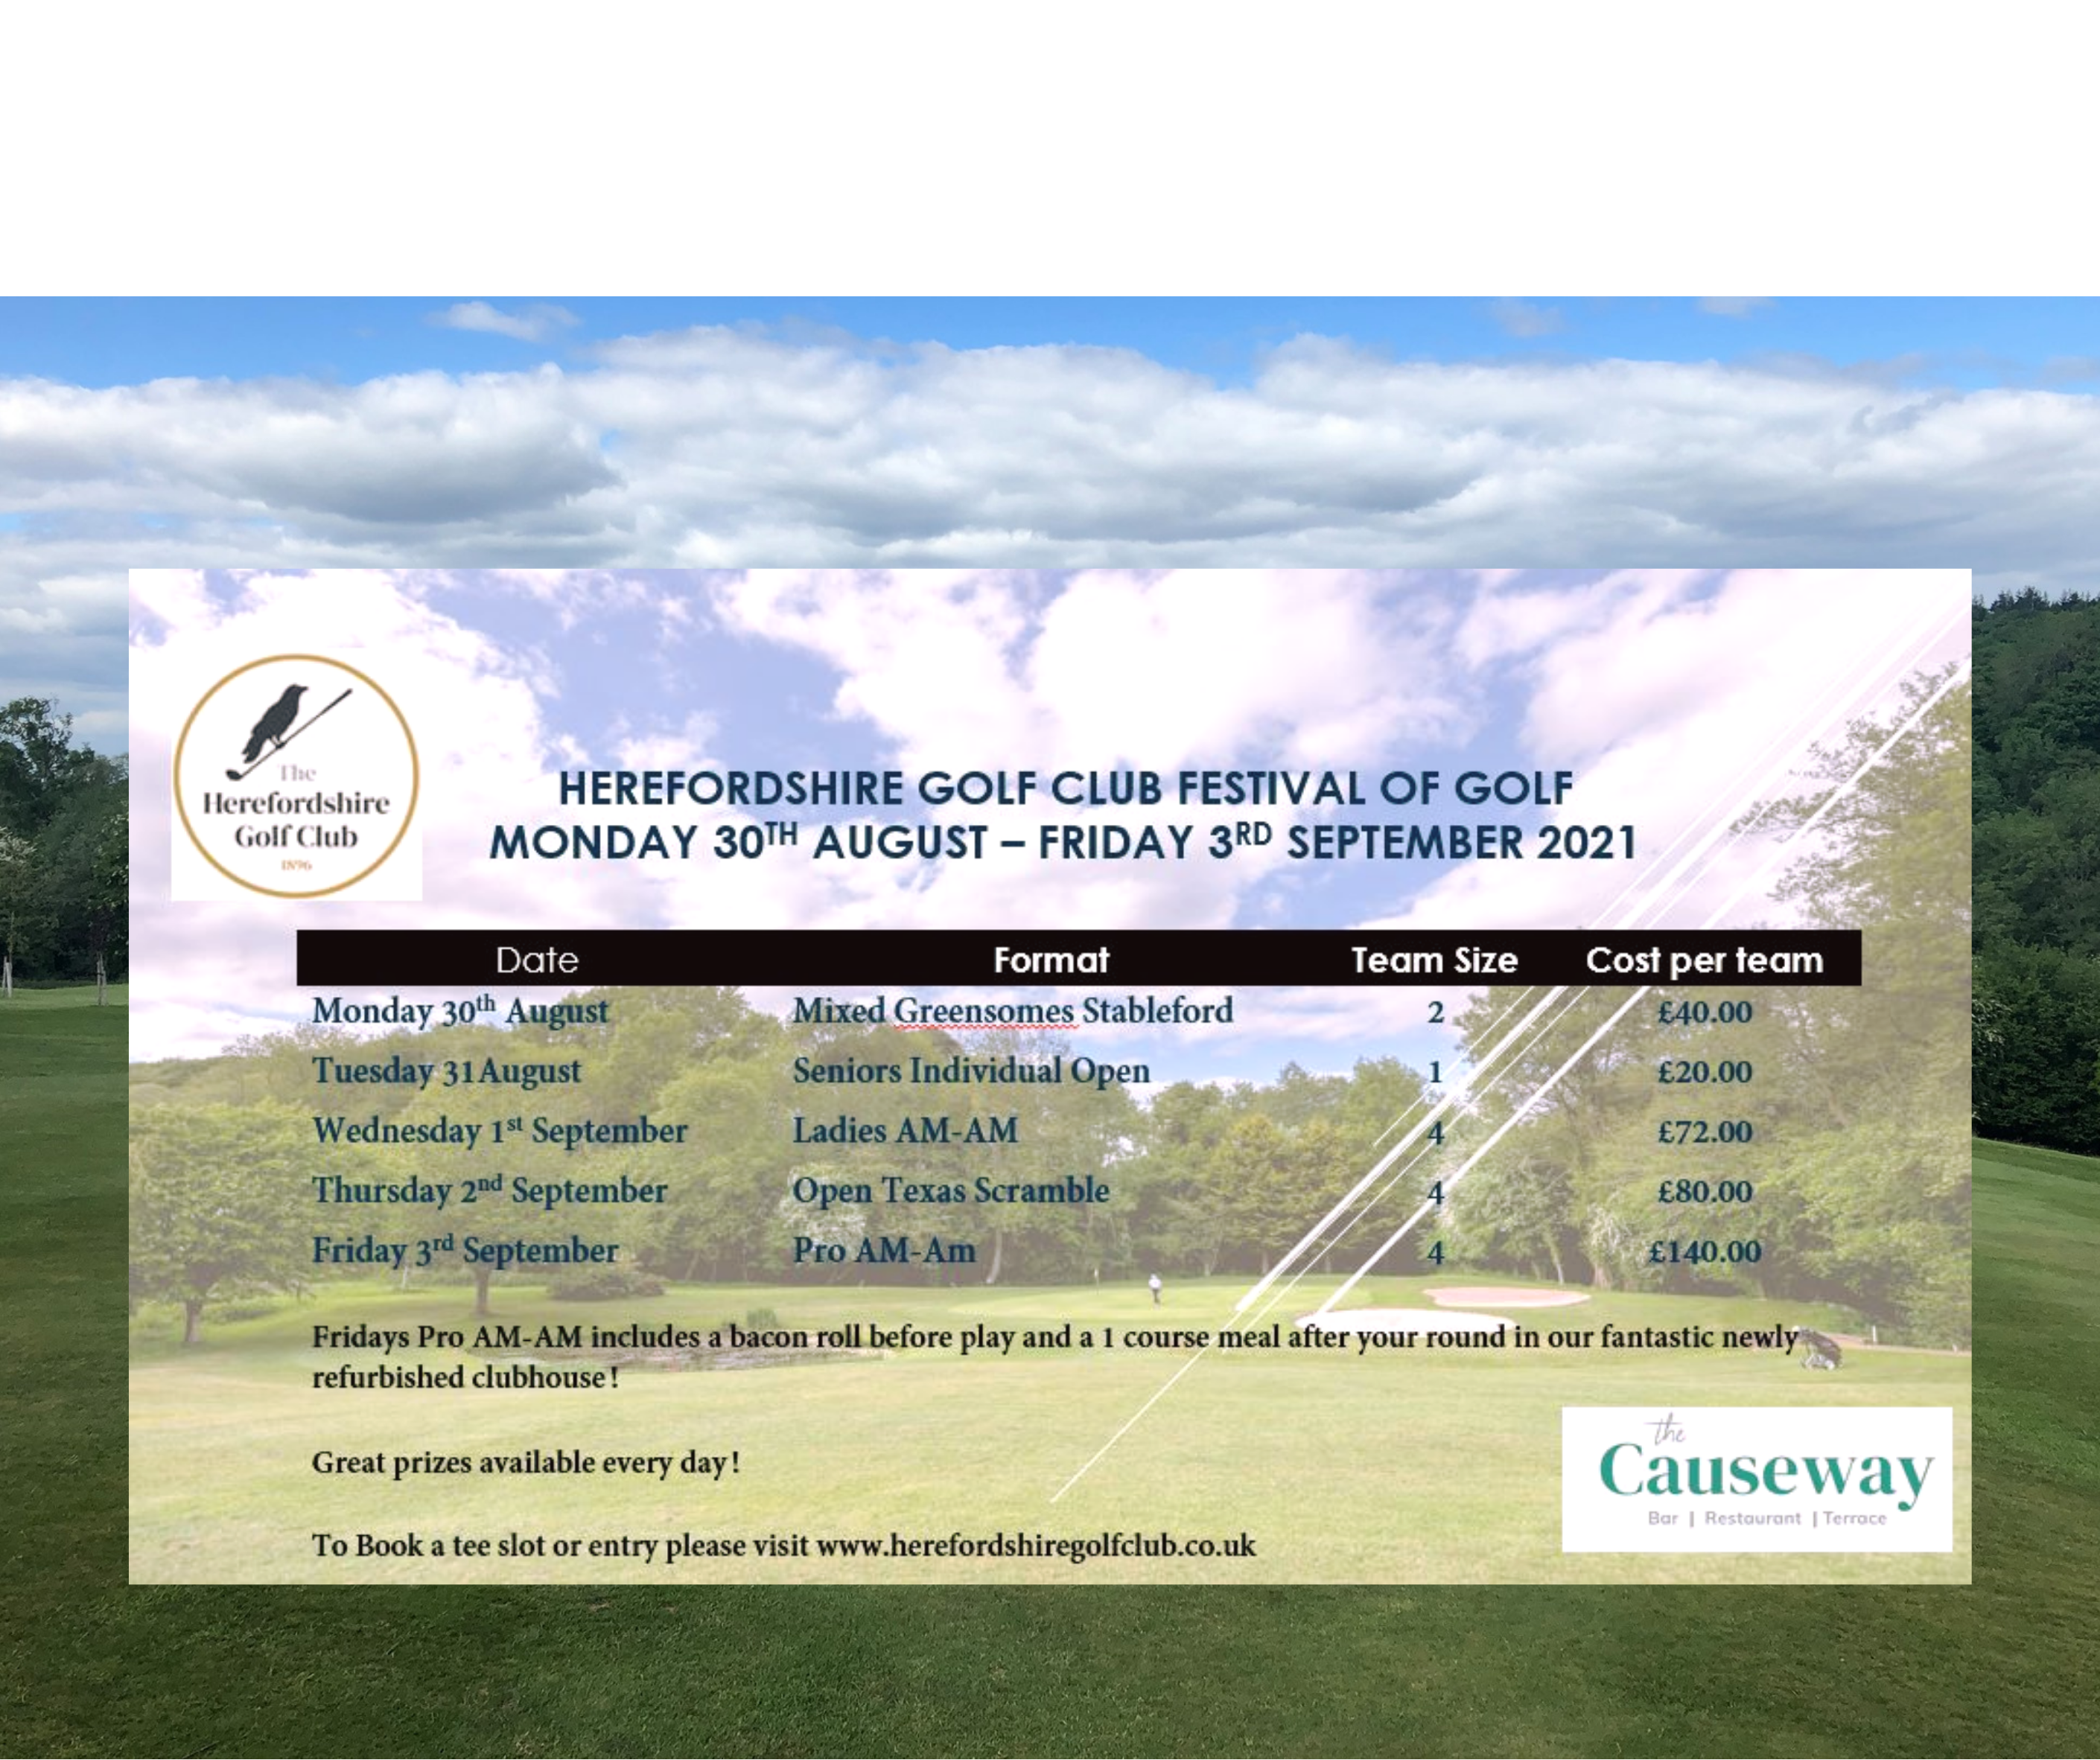 WHAT’S ON? | The Herefordshire Golf Club’s Festival of Golf 2021